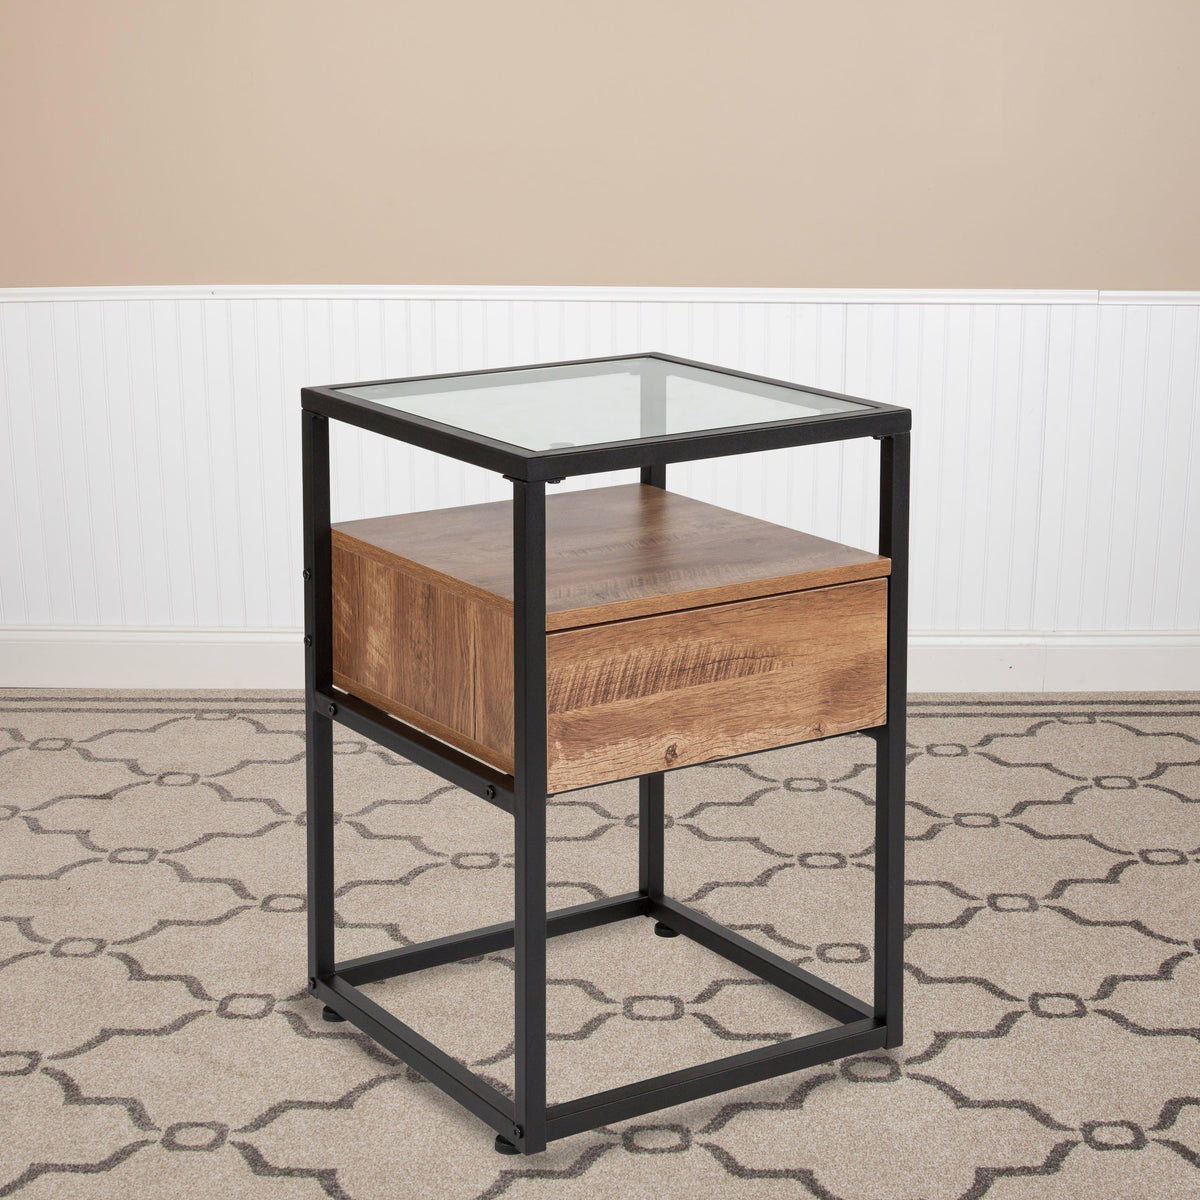 Glass End Table with Drawer and Shelf in Rustic Wood Grain Finish